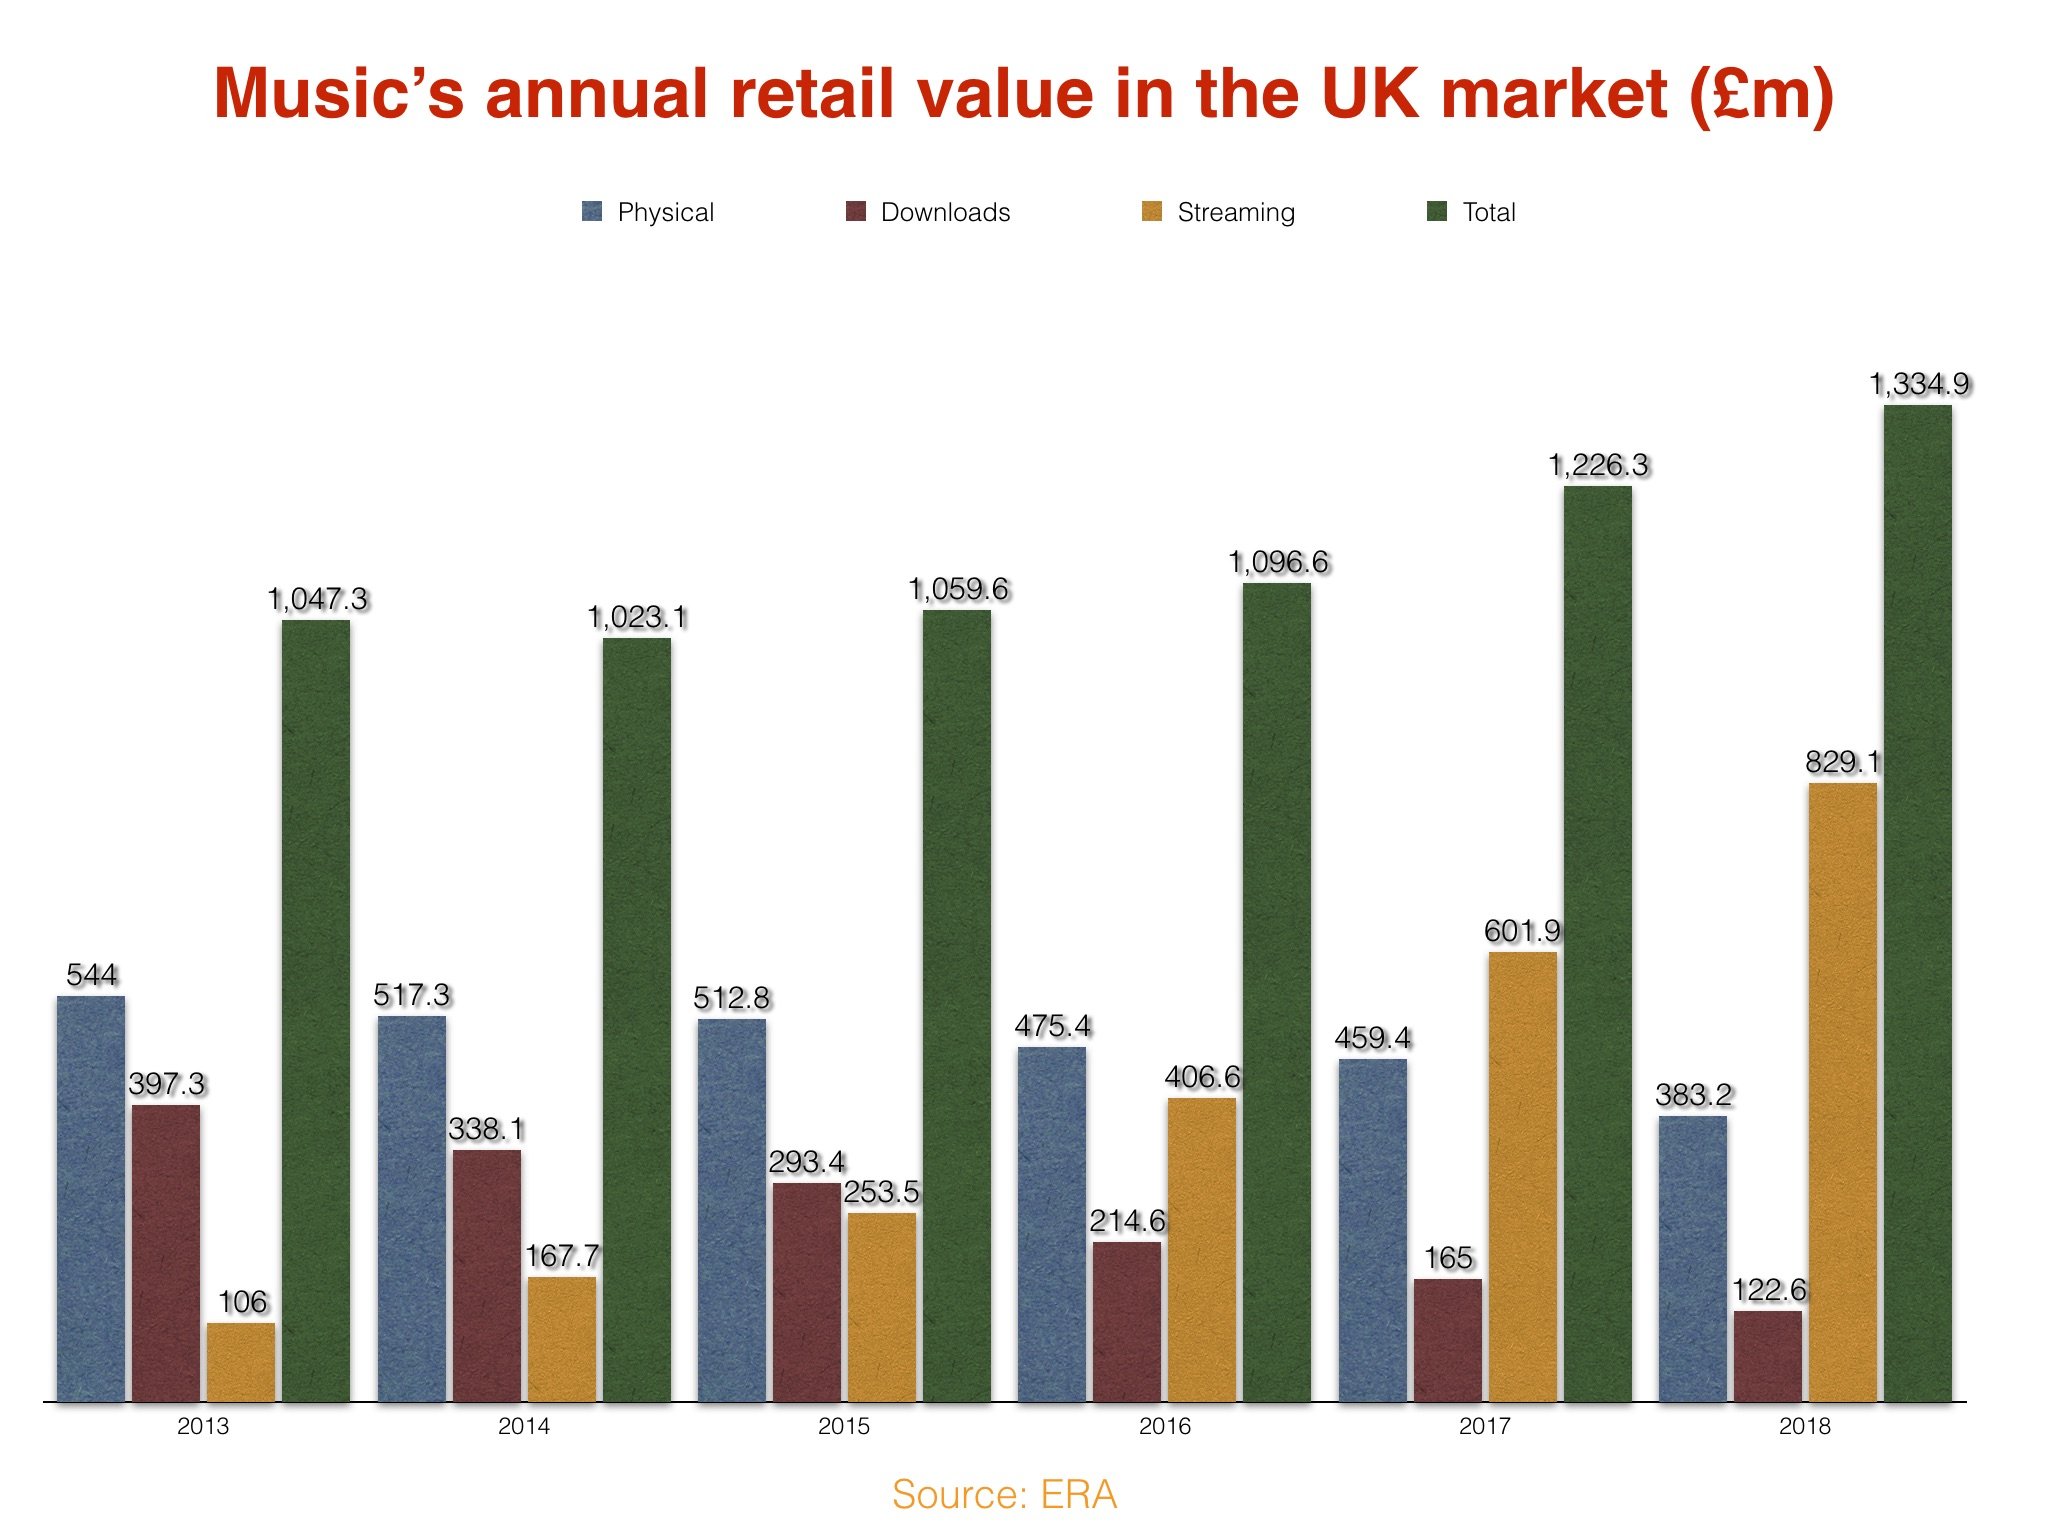 UK record industry enjoys £109m annual growth – but album sales tanked in 2018 - Business Worldwide